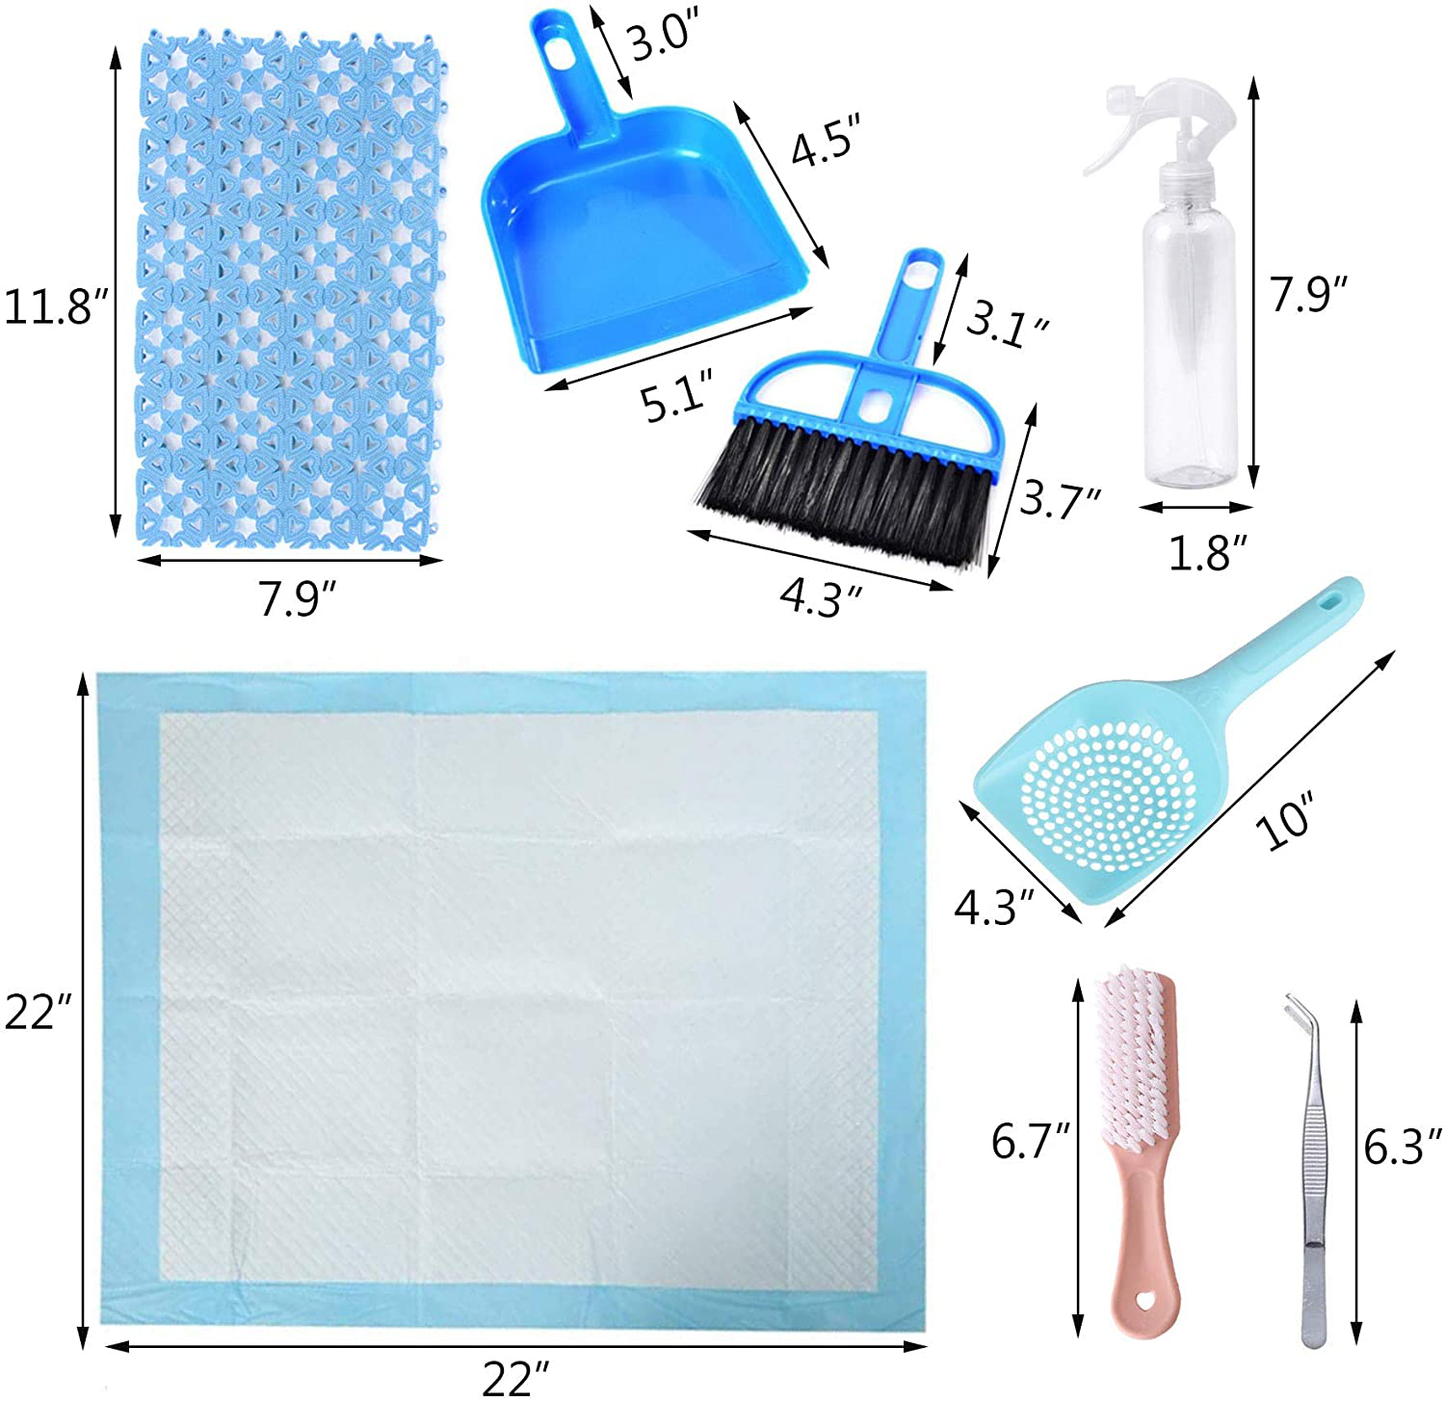 Hamiledyi Small Pet Cage Cleaner Set, Disposable Rabbit Cage Liner, Guinea Pig Playpen Mini Hand Broom Dustpan, Cleaning Brush Sand Scooper Floor for Rabbit Chinchilla Hedgehogs Animals & Pet Supplies > Pet Supplies > Small Animal Supplies > Small Animal Bedding Hamiledyi   